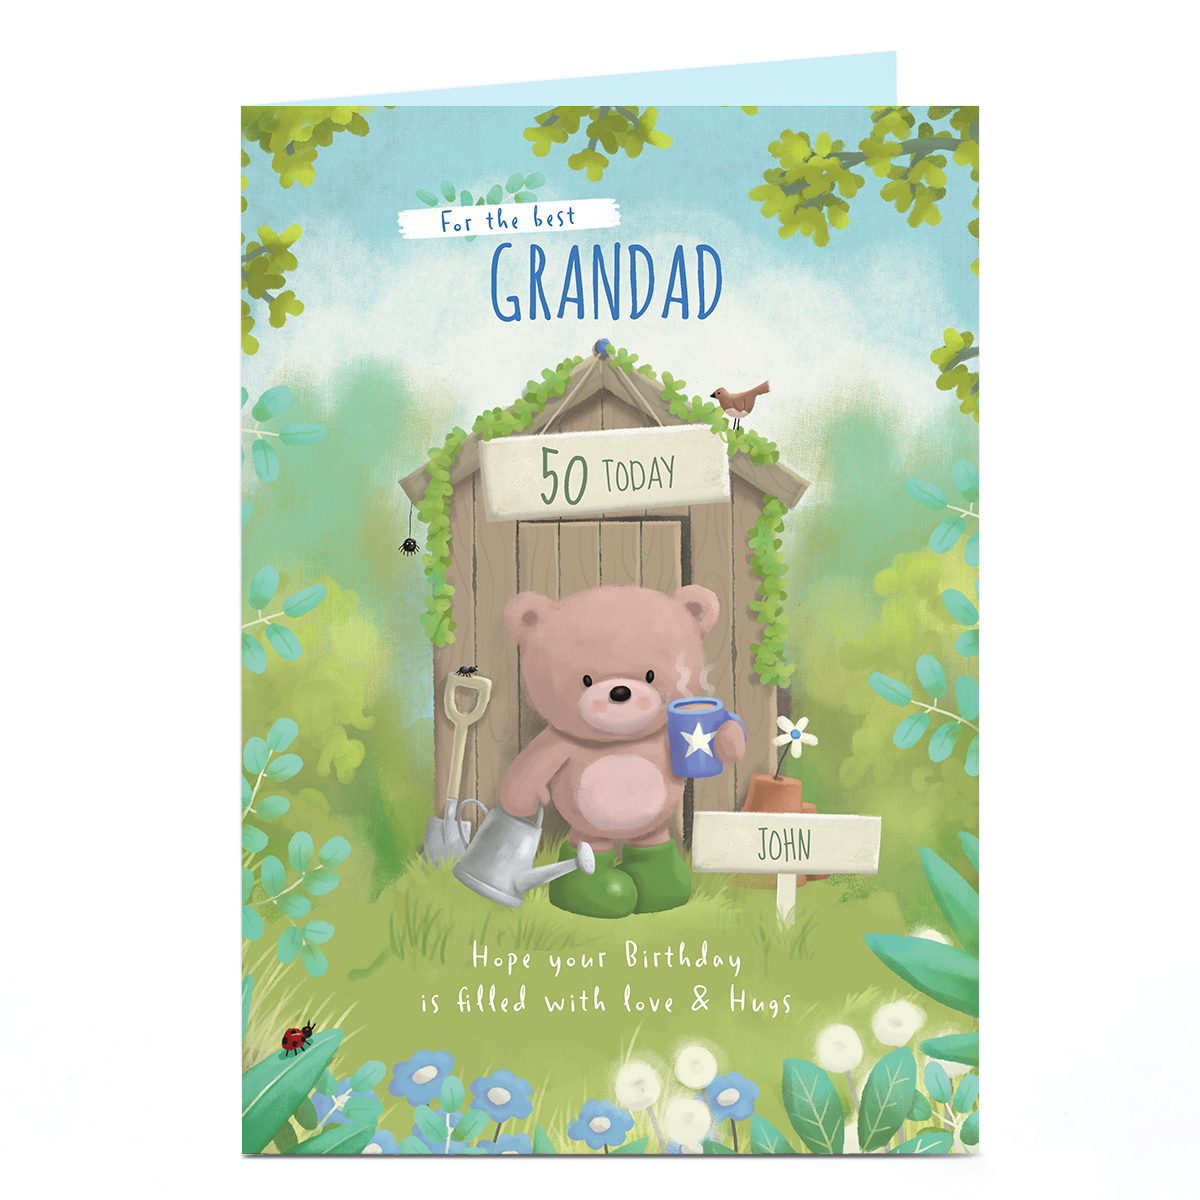 Personalised Hugs Birthday Card - Garden Shed, Editable Age